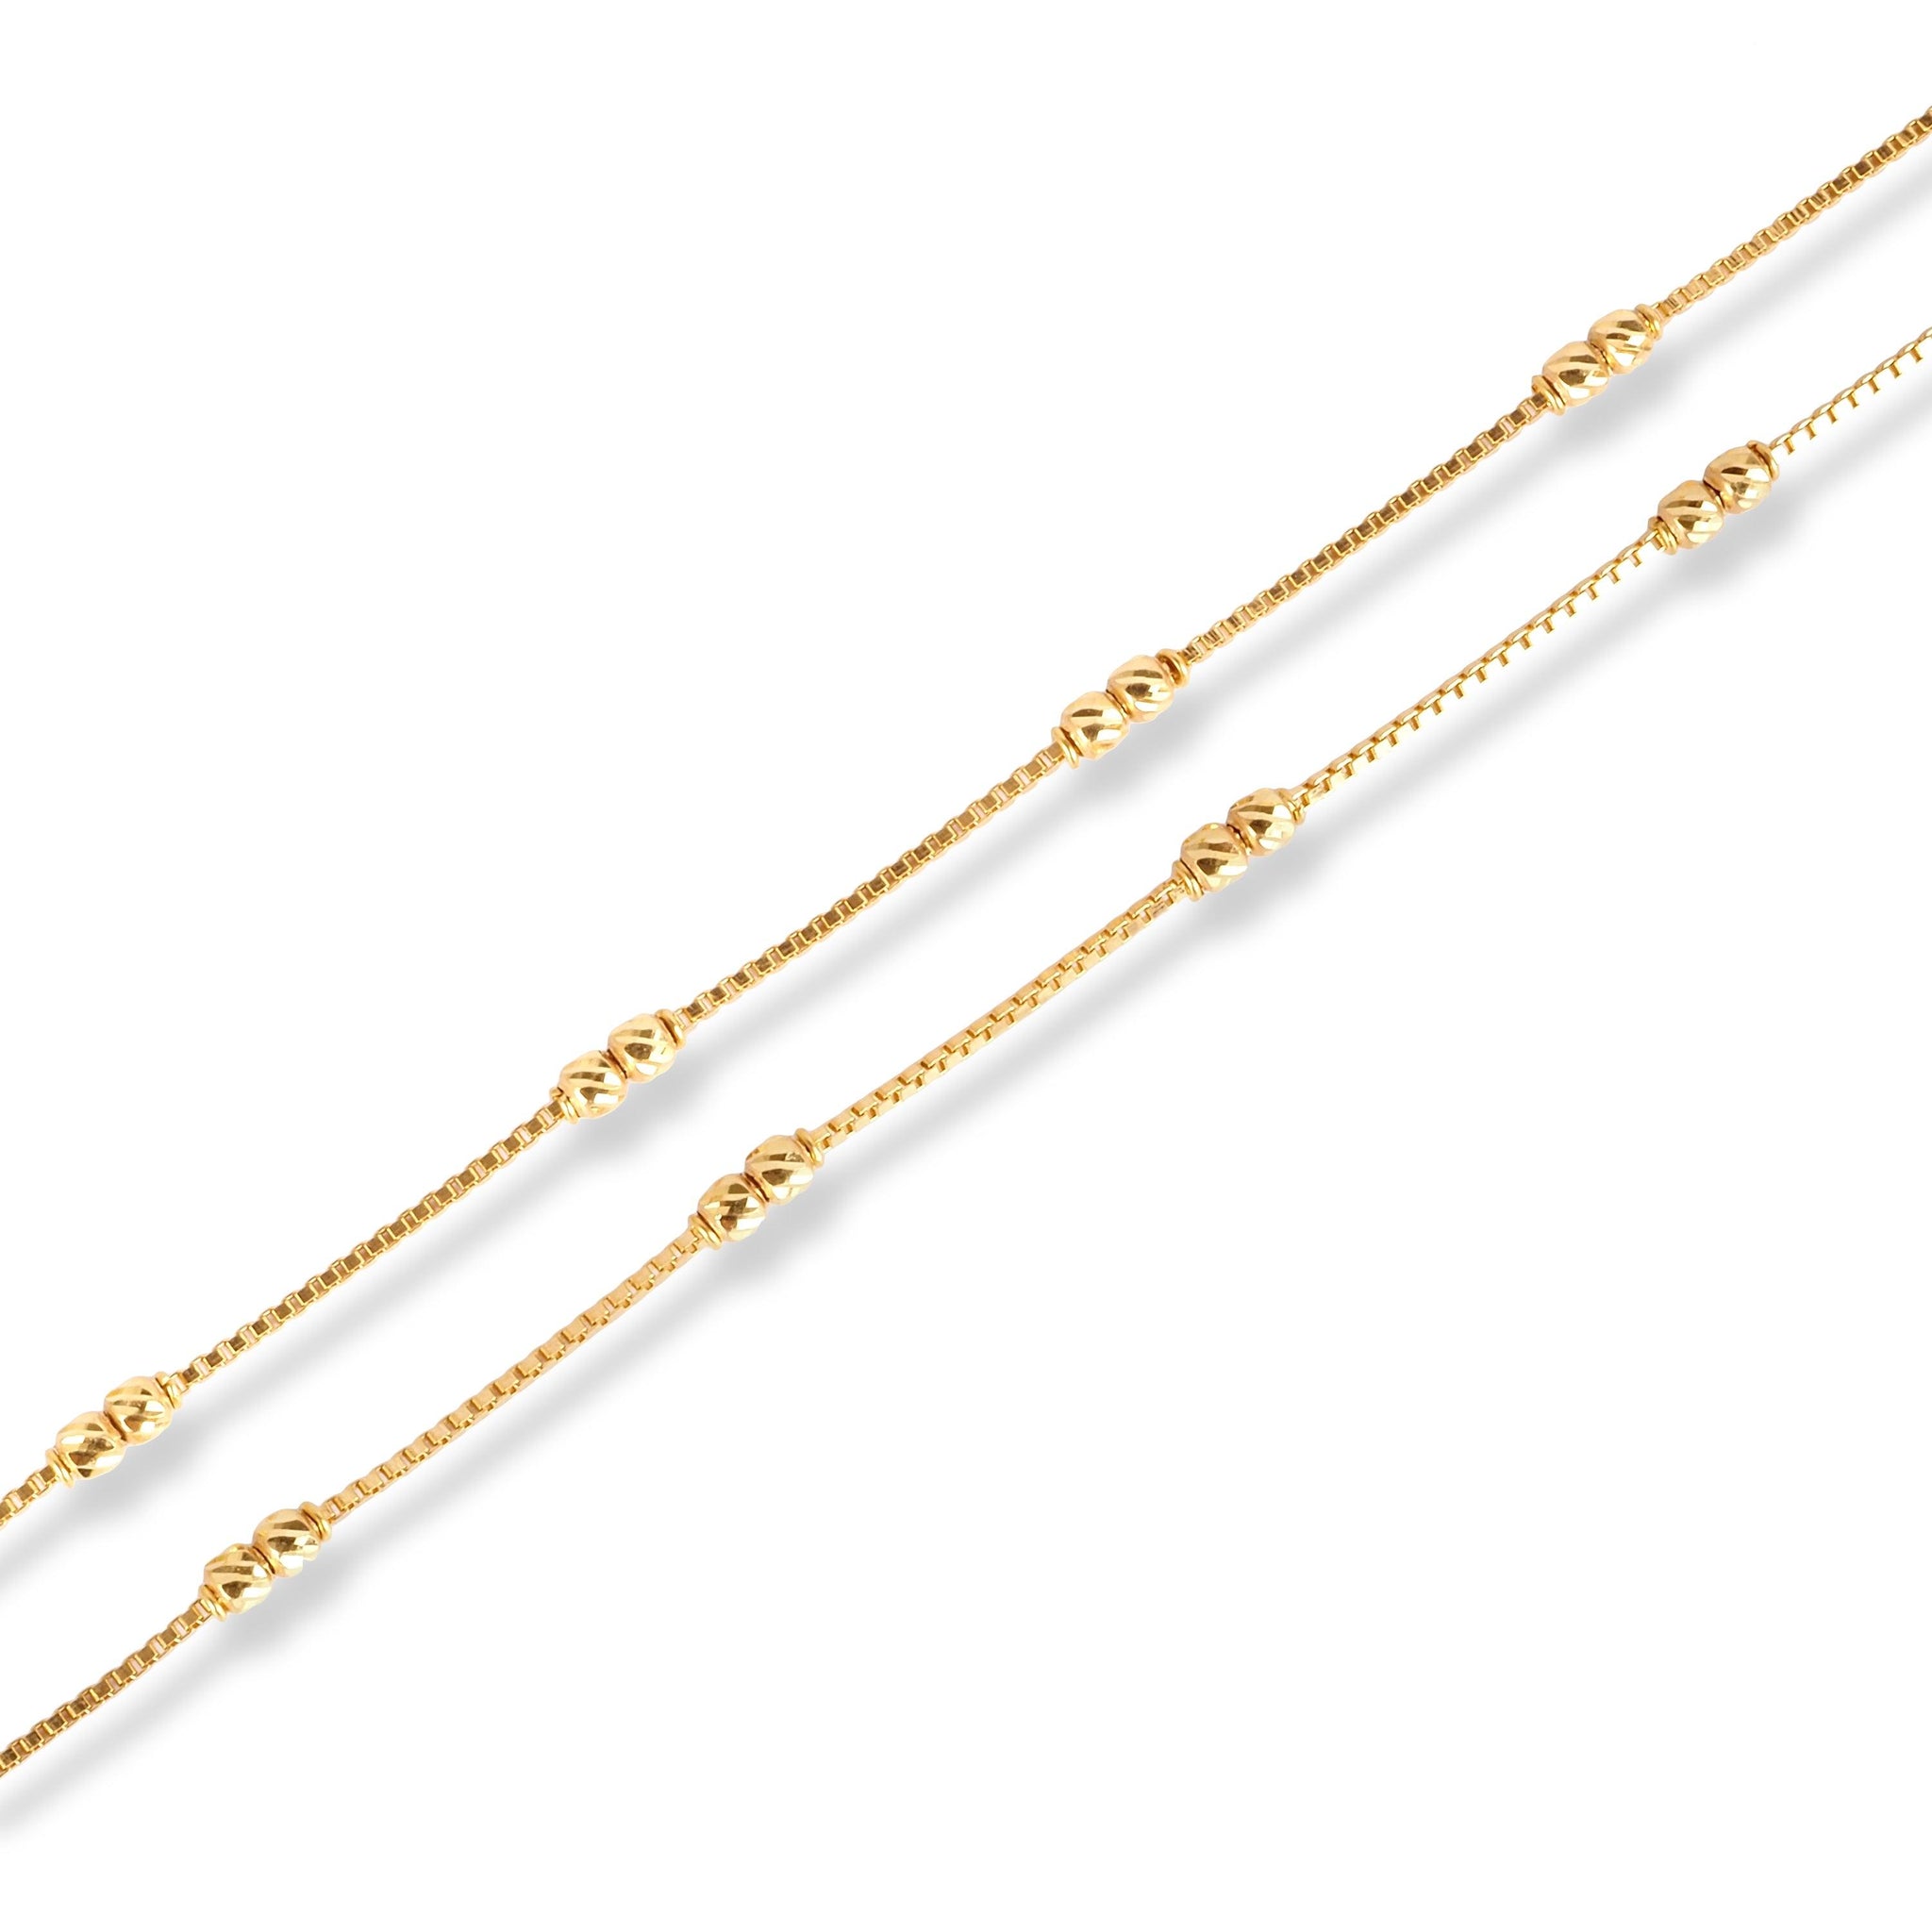 Pair of 22ct Gold Anklet in Diamond Cutting Beads with Ghughri Charm with '' S '' Clasp A-8269